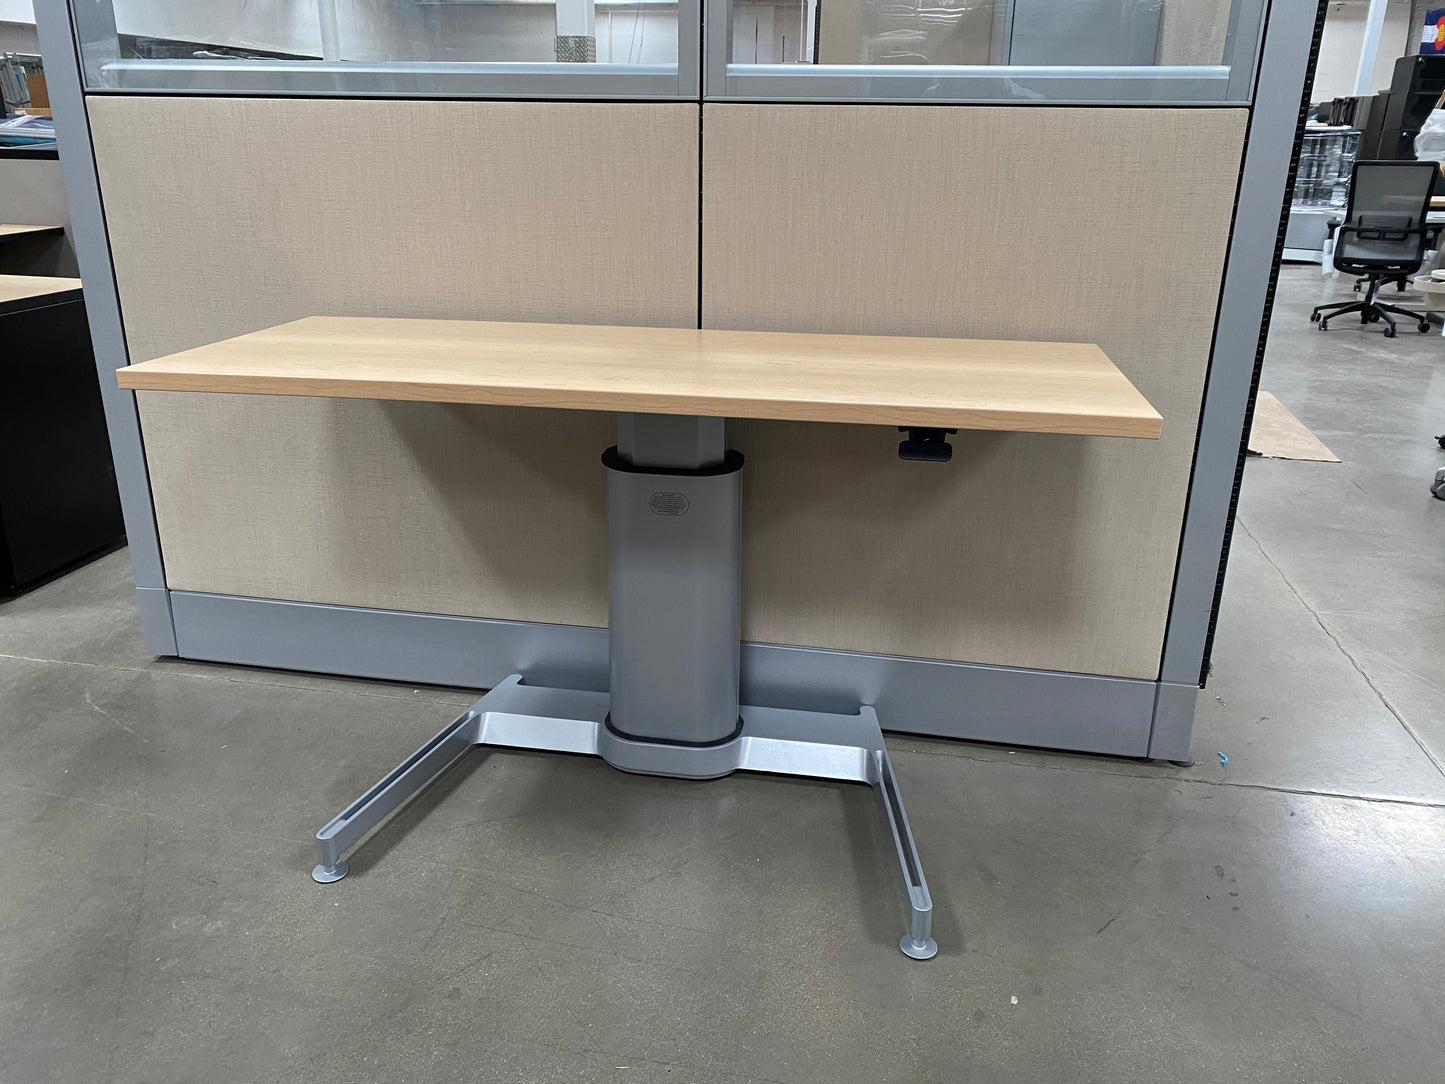 Steelcase Airtouch adjustable height desk